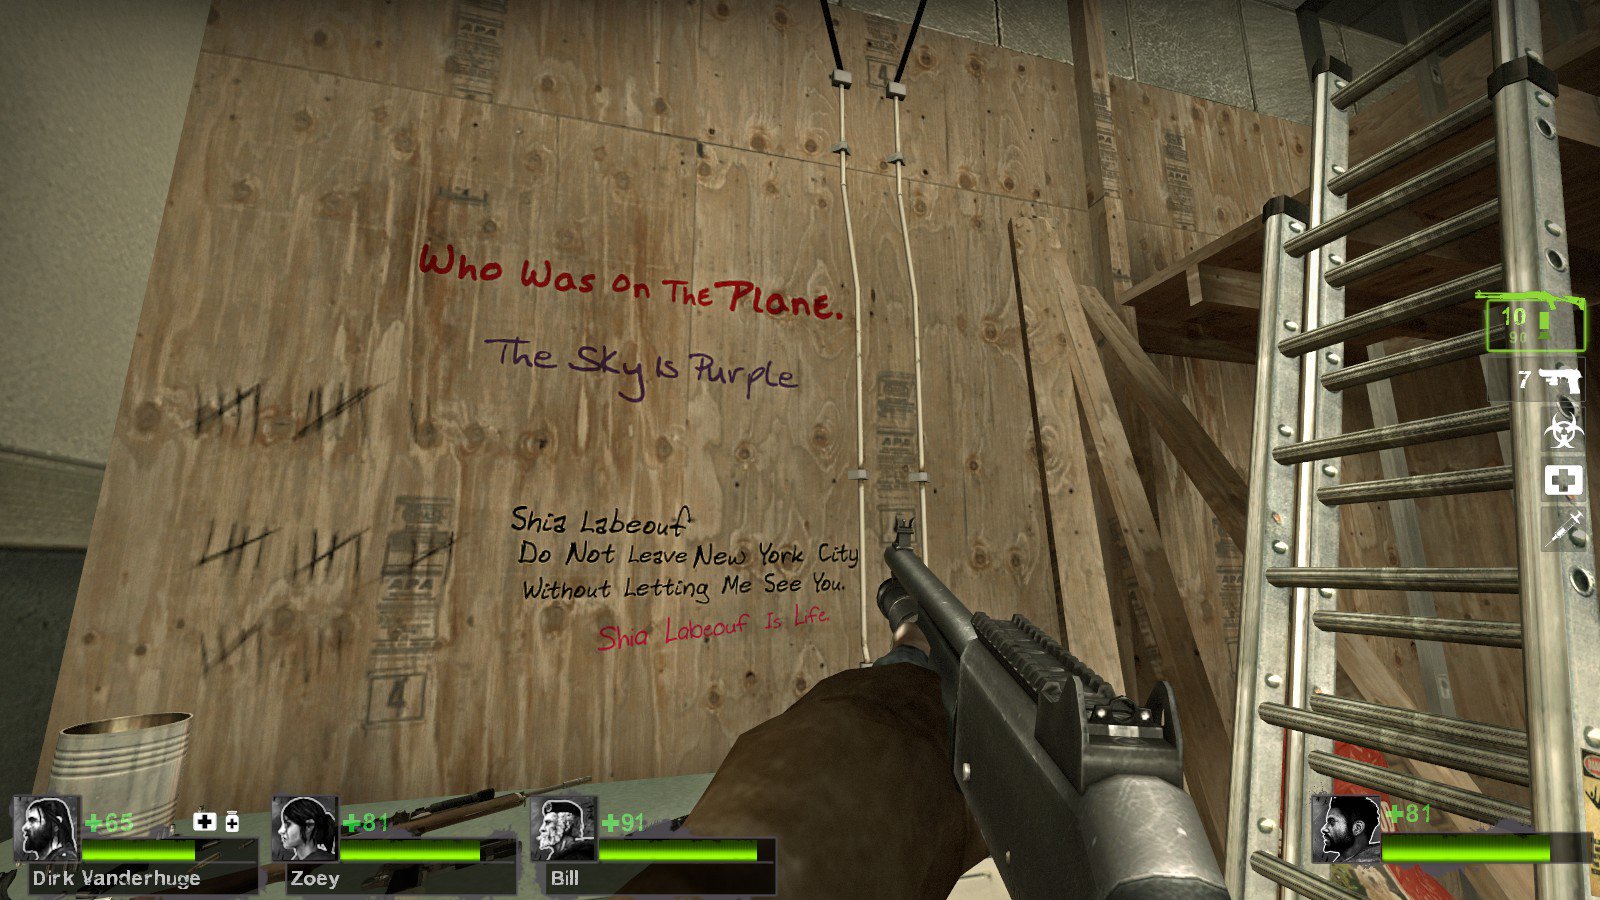 The Timeless Simplicity Of Left 4 Dead 2 - MonsterVine